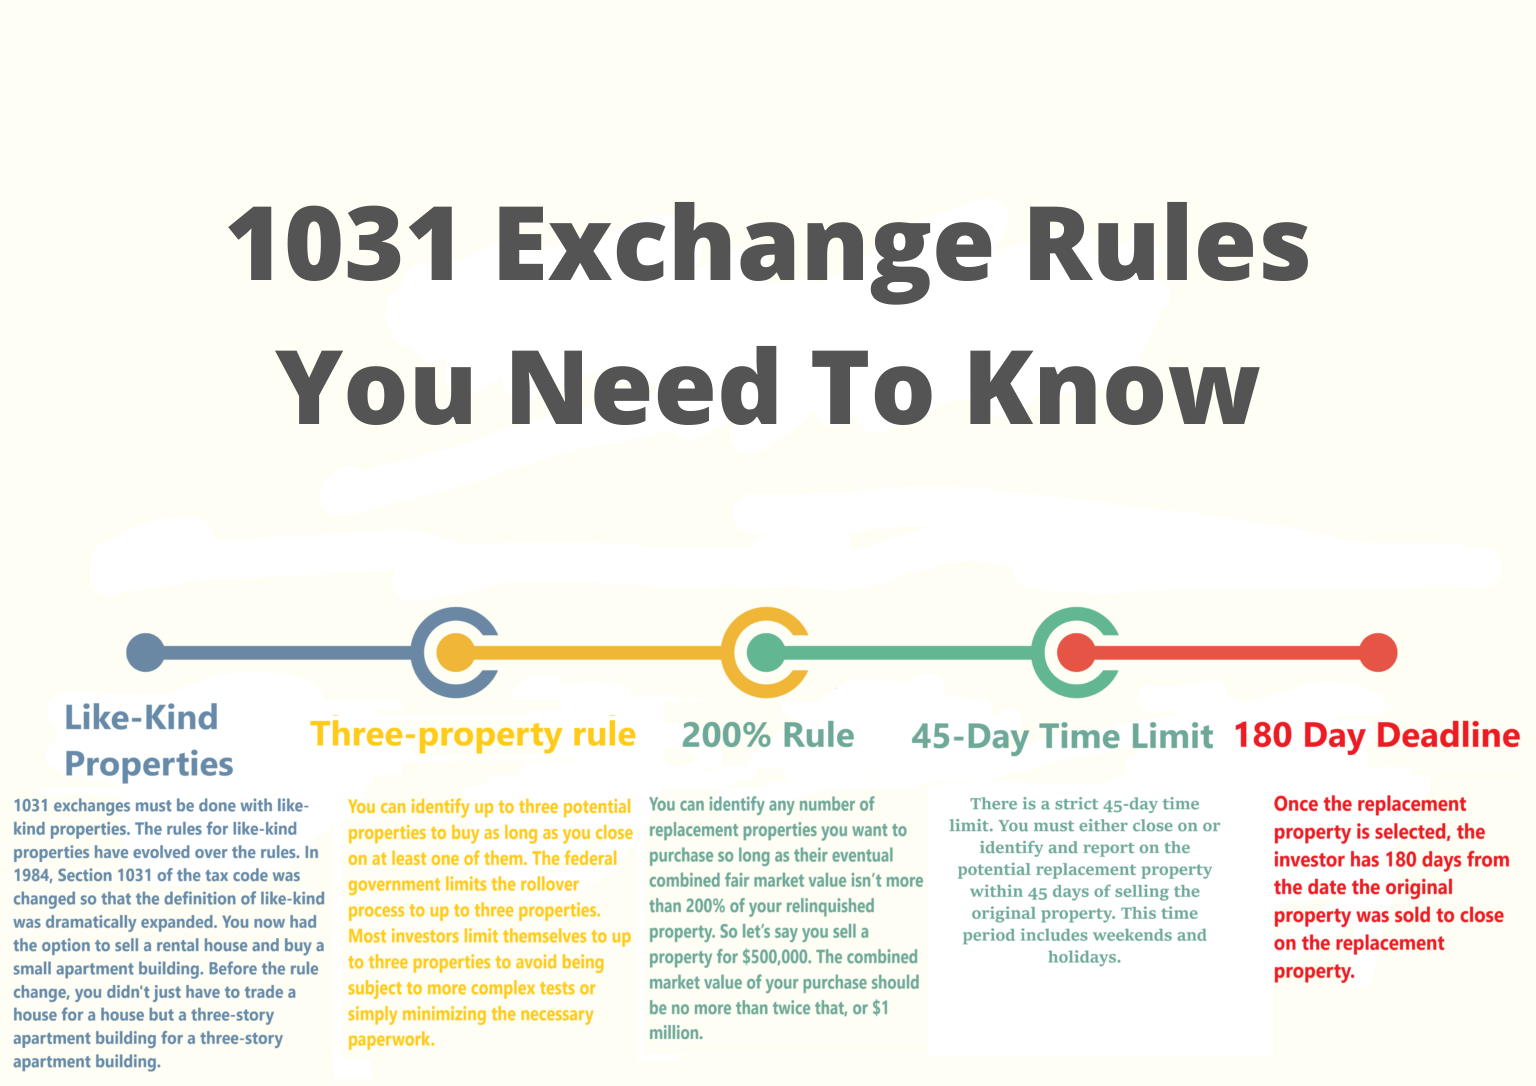 1031 Exchange Rules: How To Do A 1031 Exchange In 2021?
